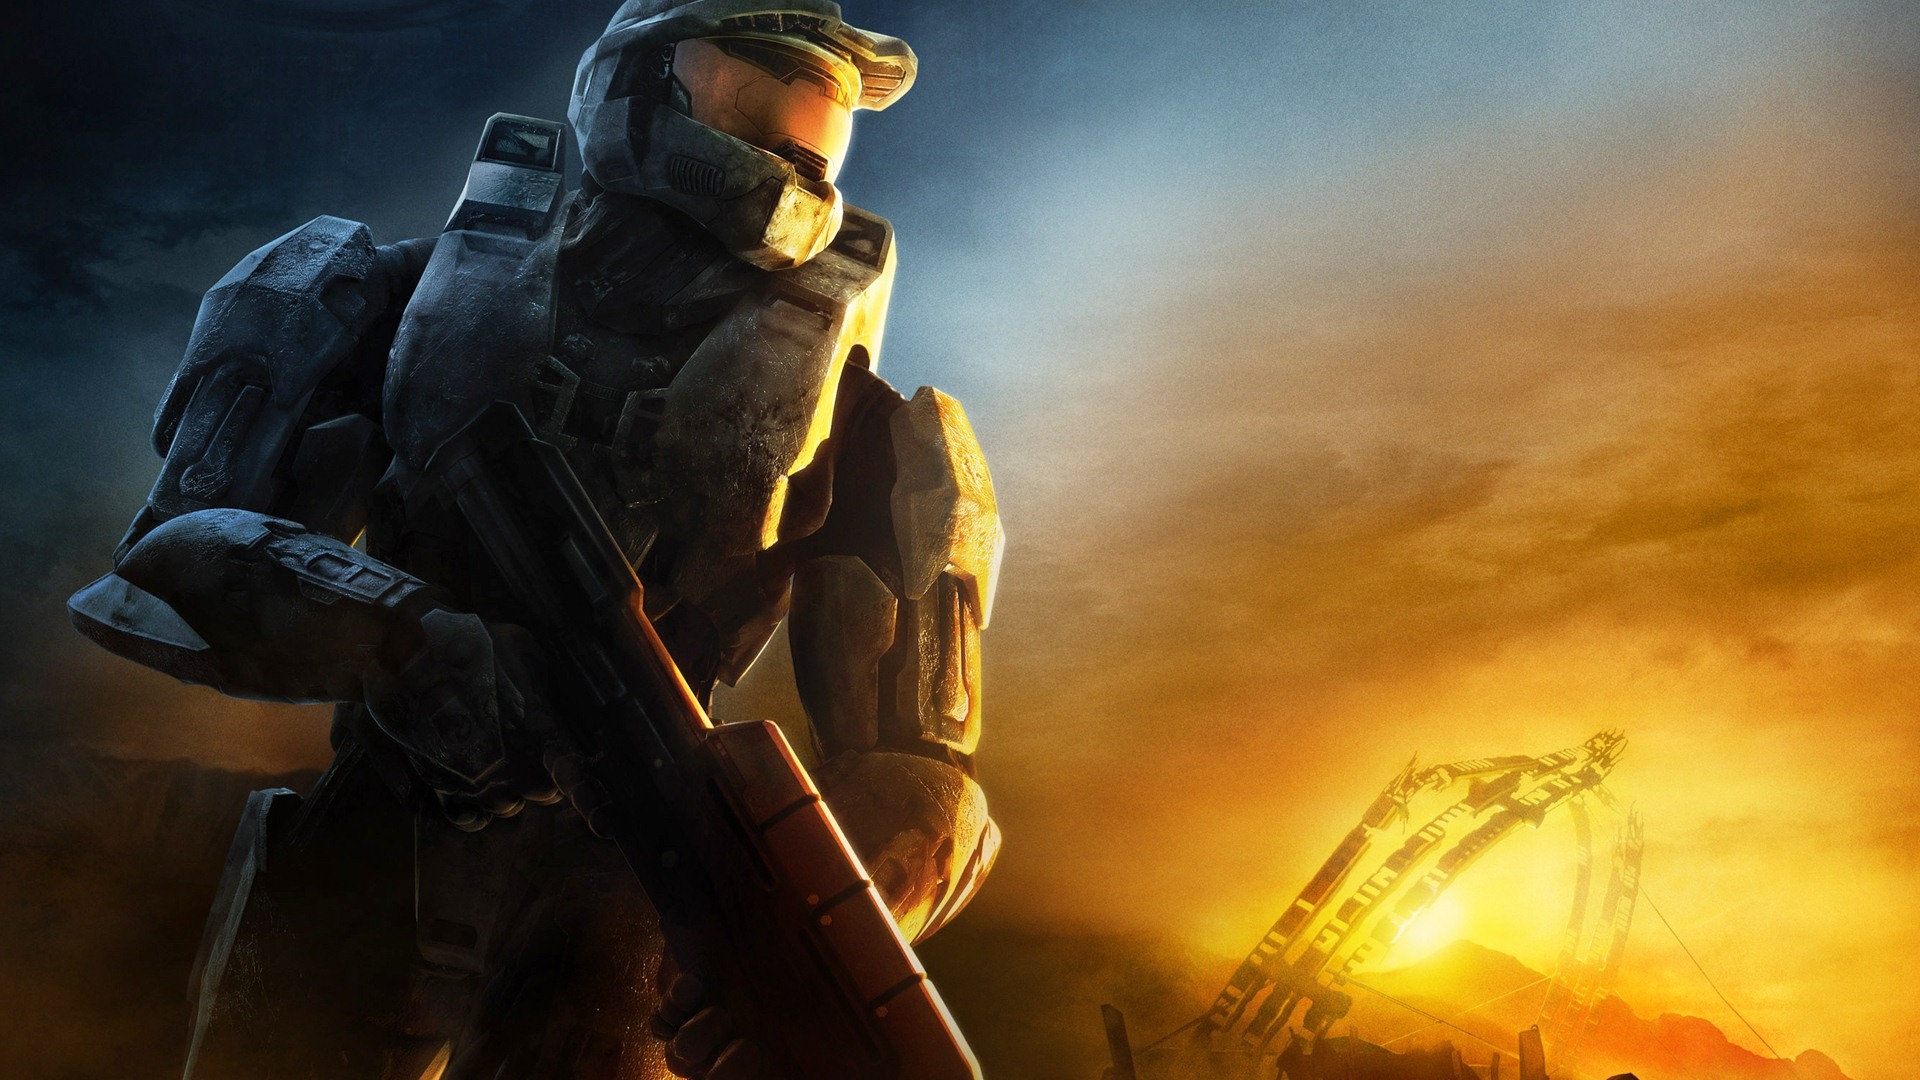 Halo game HD wallpapers #22 - 1920x1080